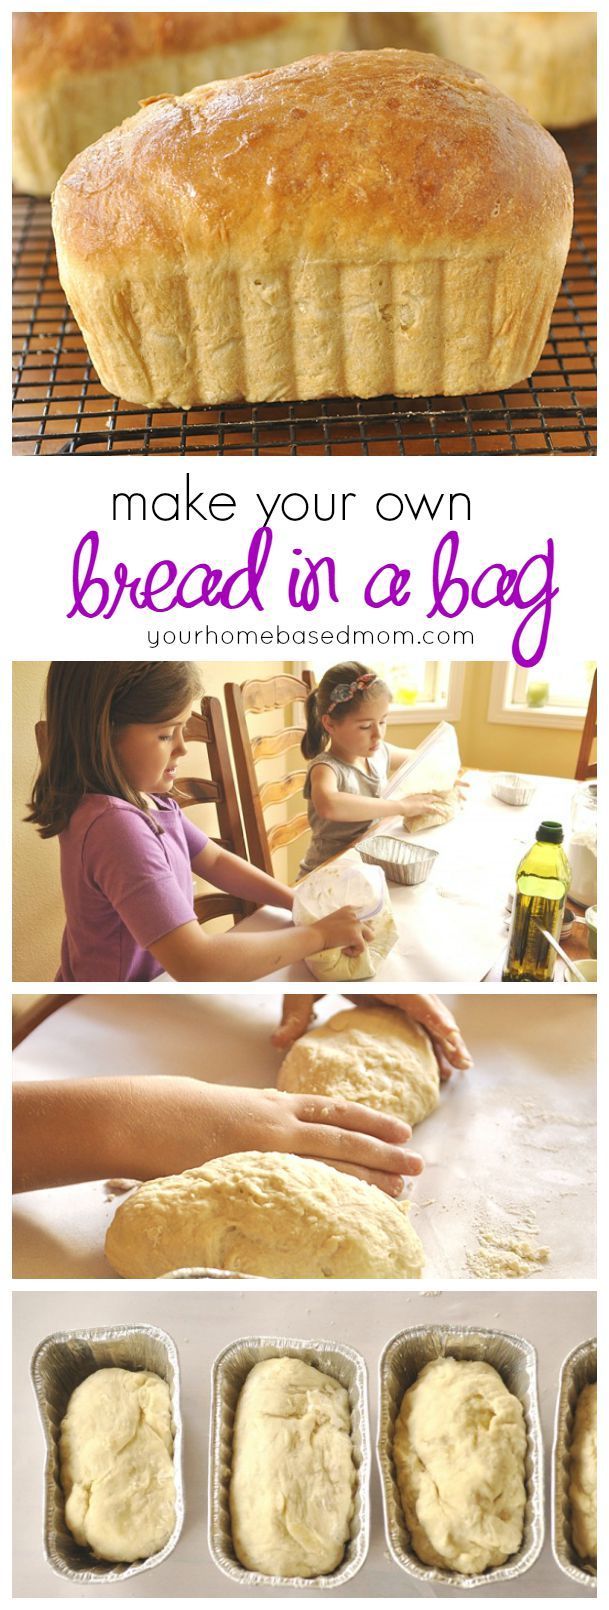 Kids will love making their own bread in a bag! Great activity to do before school starts.